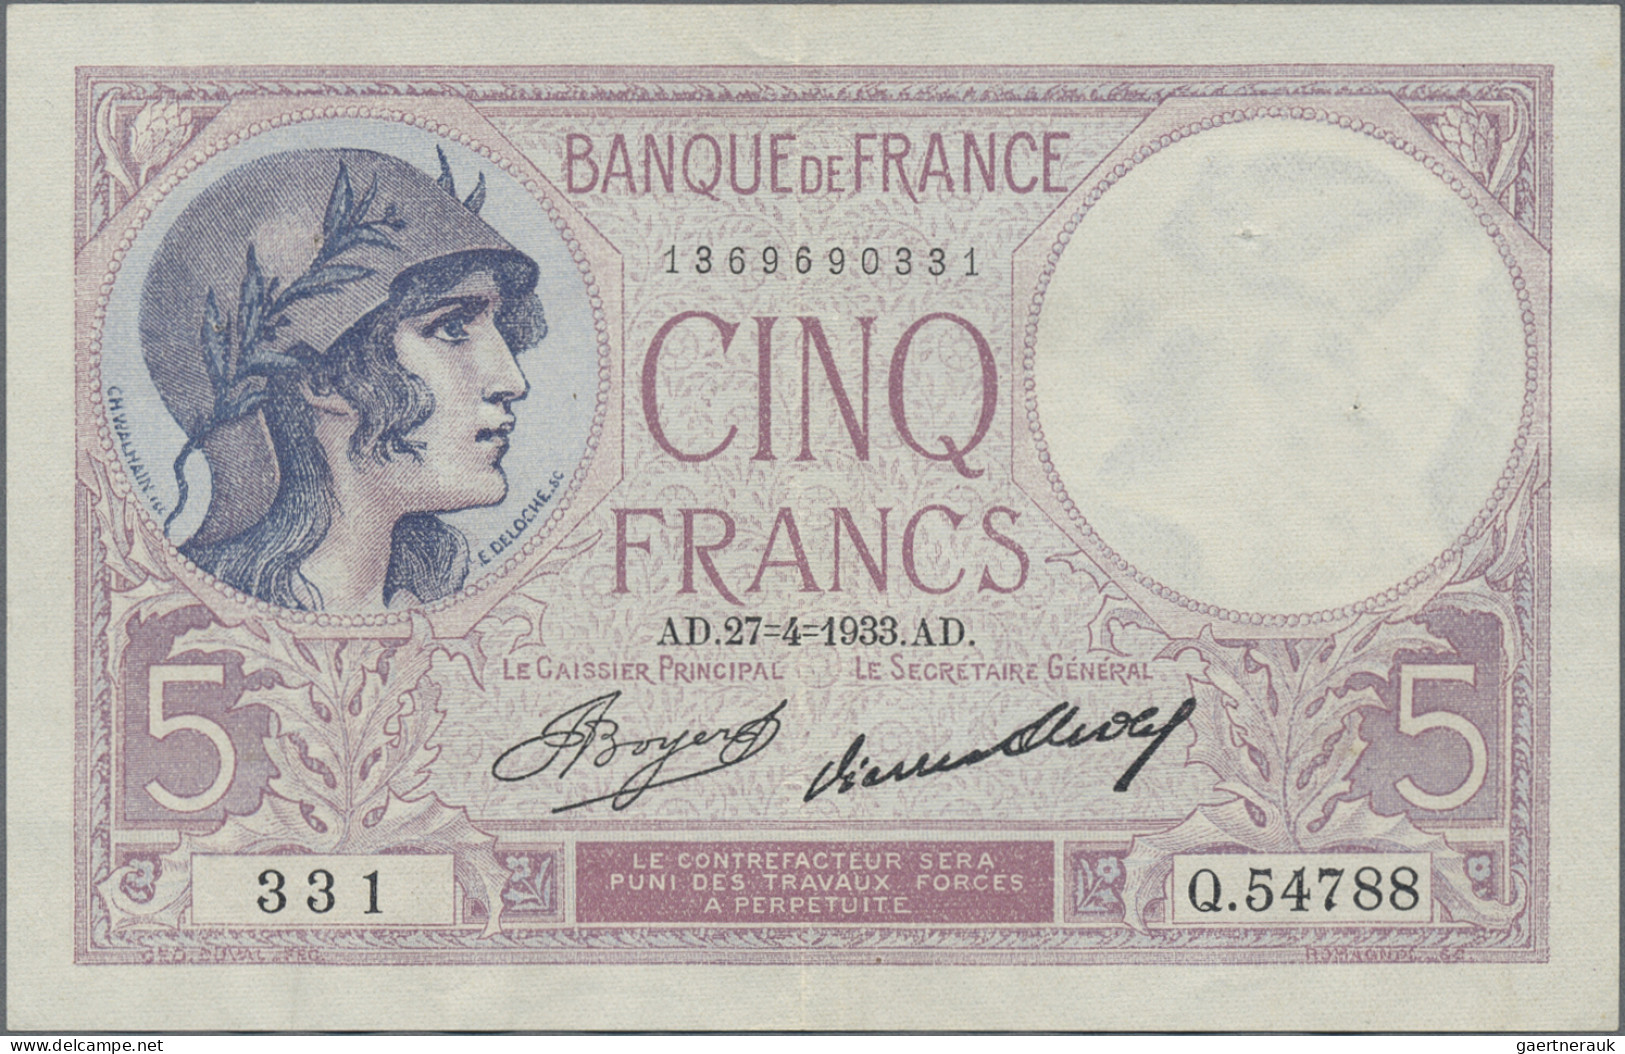 France: Banque de France, set with 6 banknotes, series 1917-1933, with 3x 5 Fran